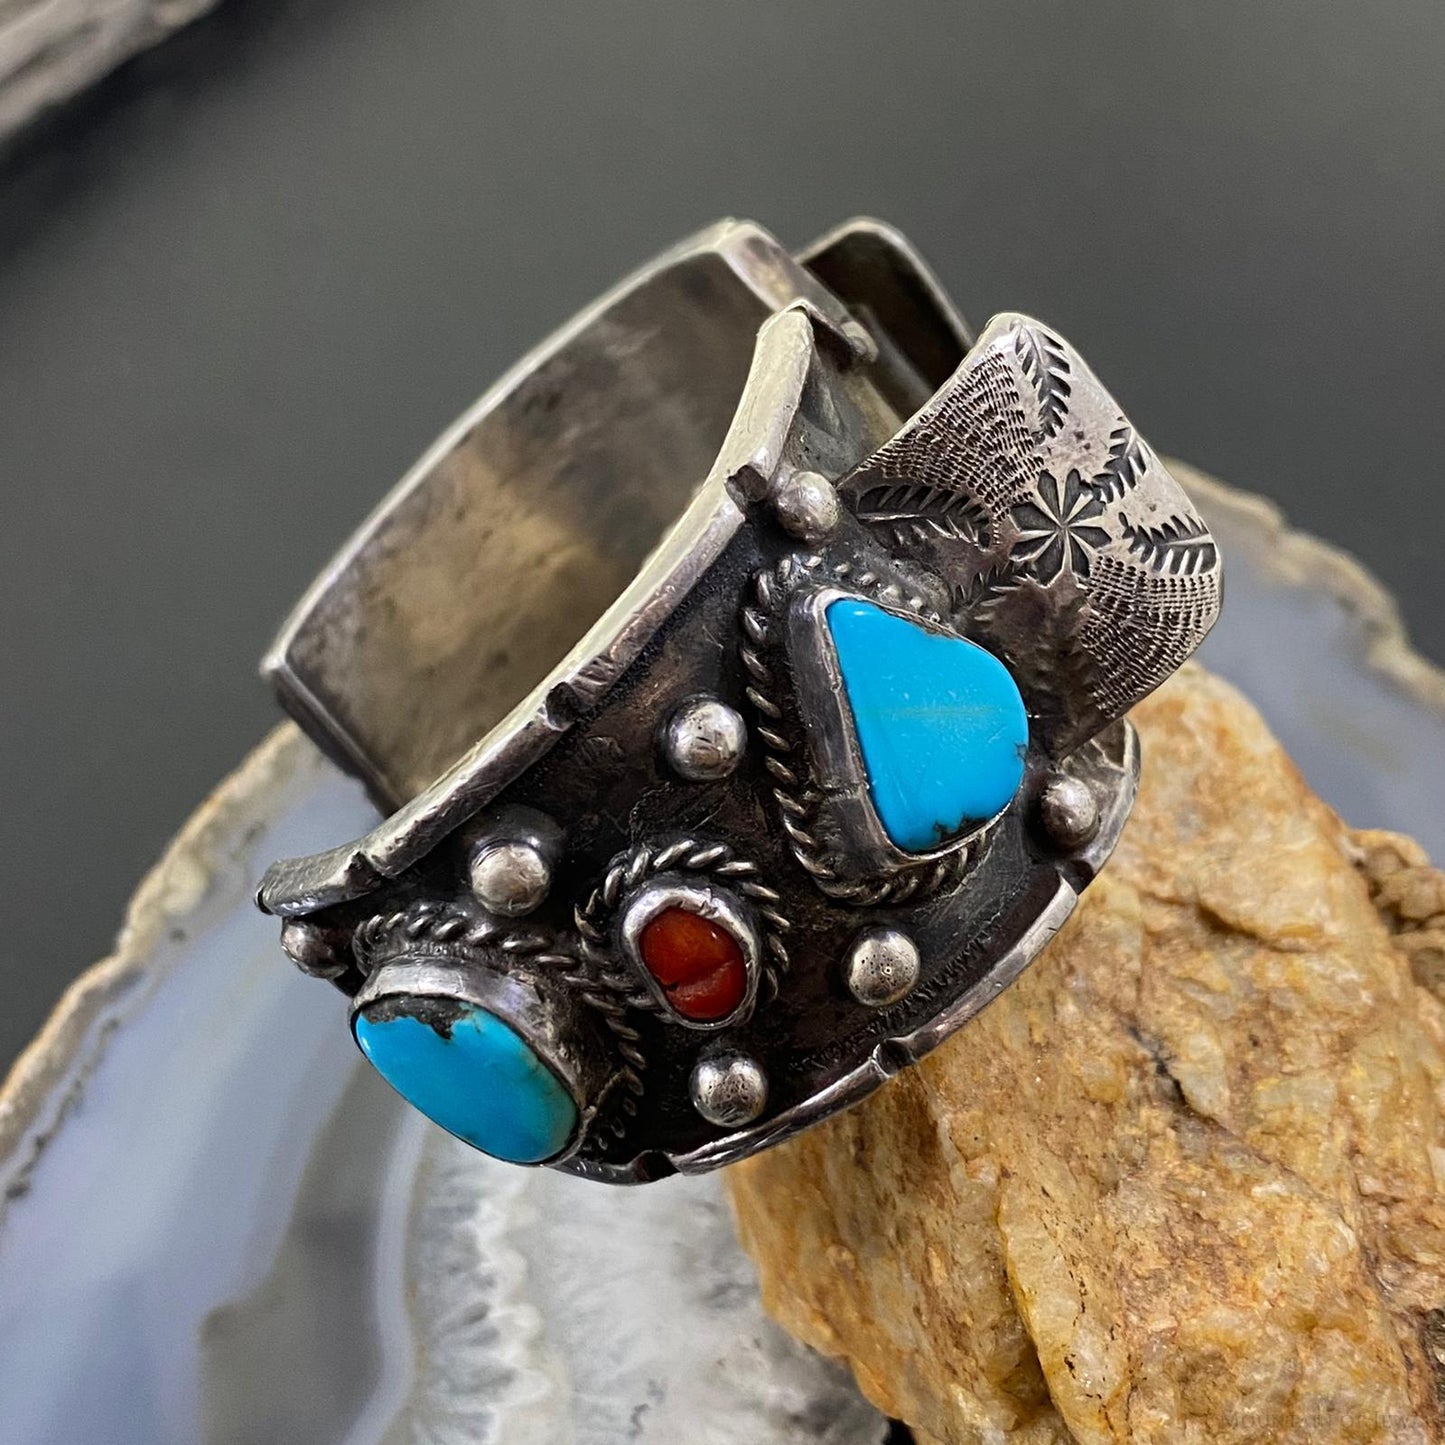 Vintage Native American Silver Turquoise & Coral Heavy Watch Bracelet For Men